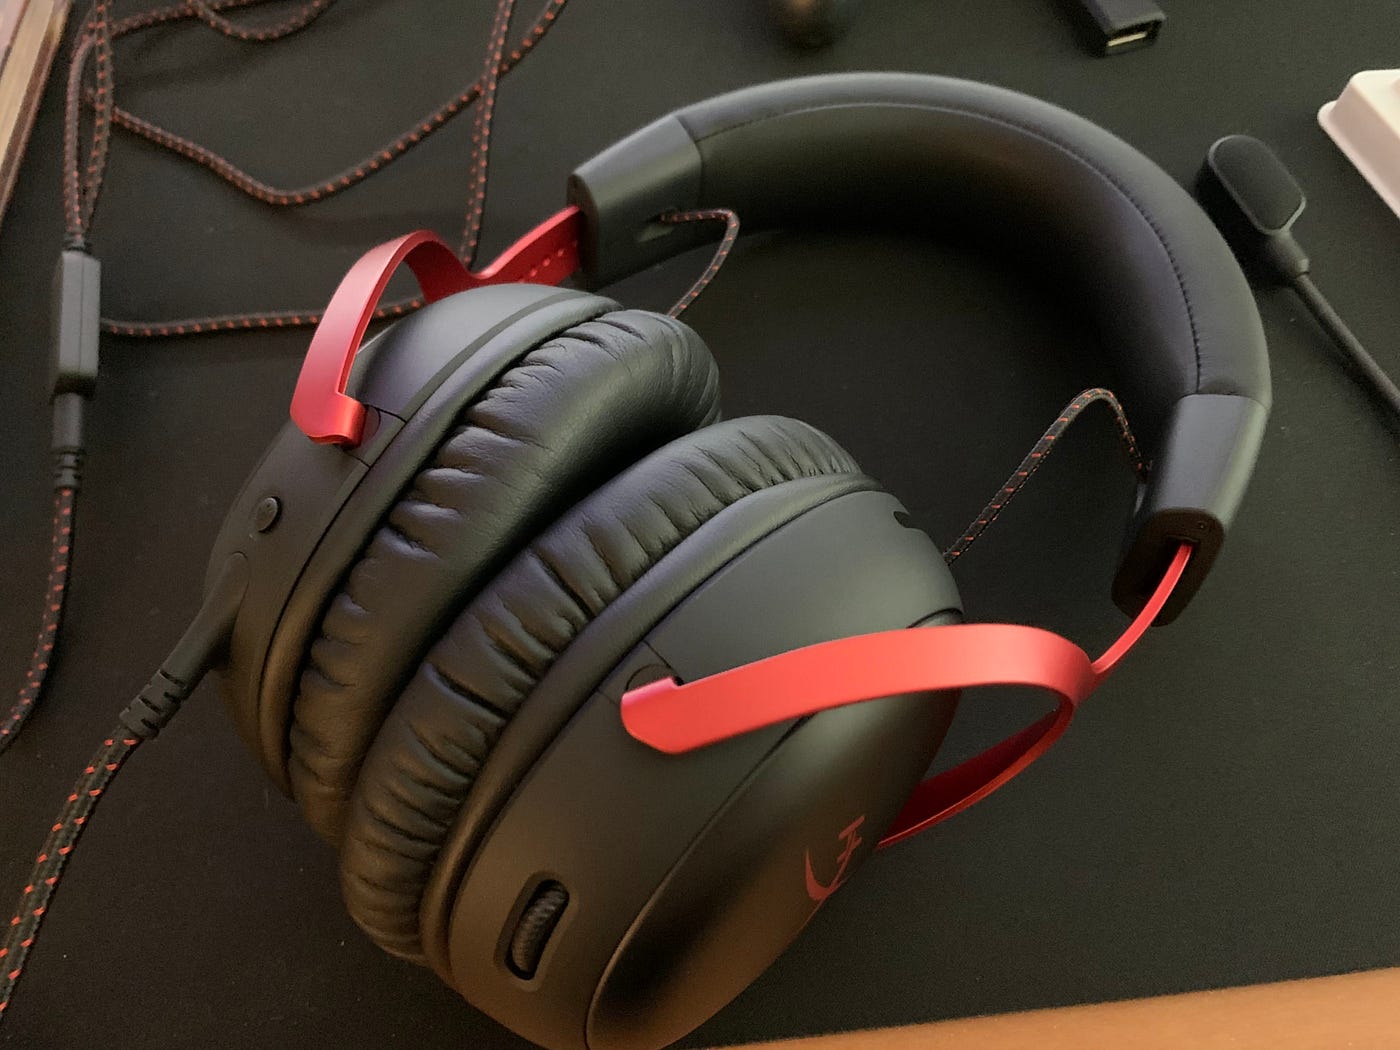 The HyperX Cloud Alpha Wireless Has Issues, by Alex Rowe